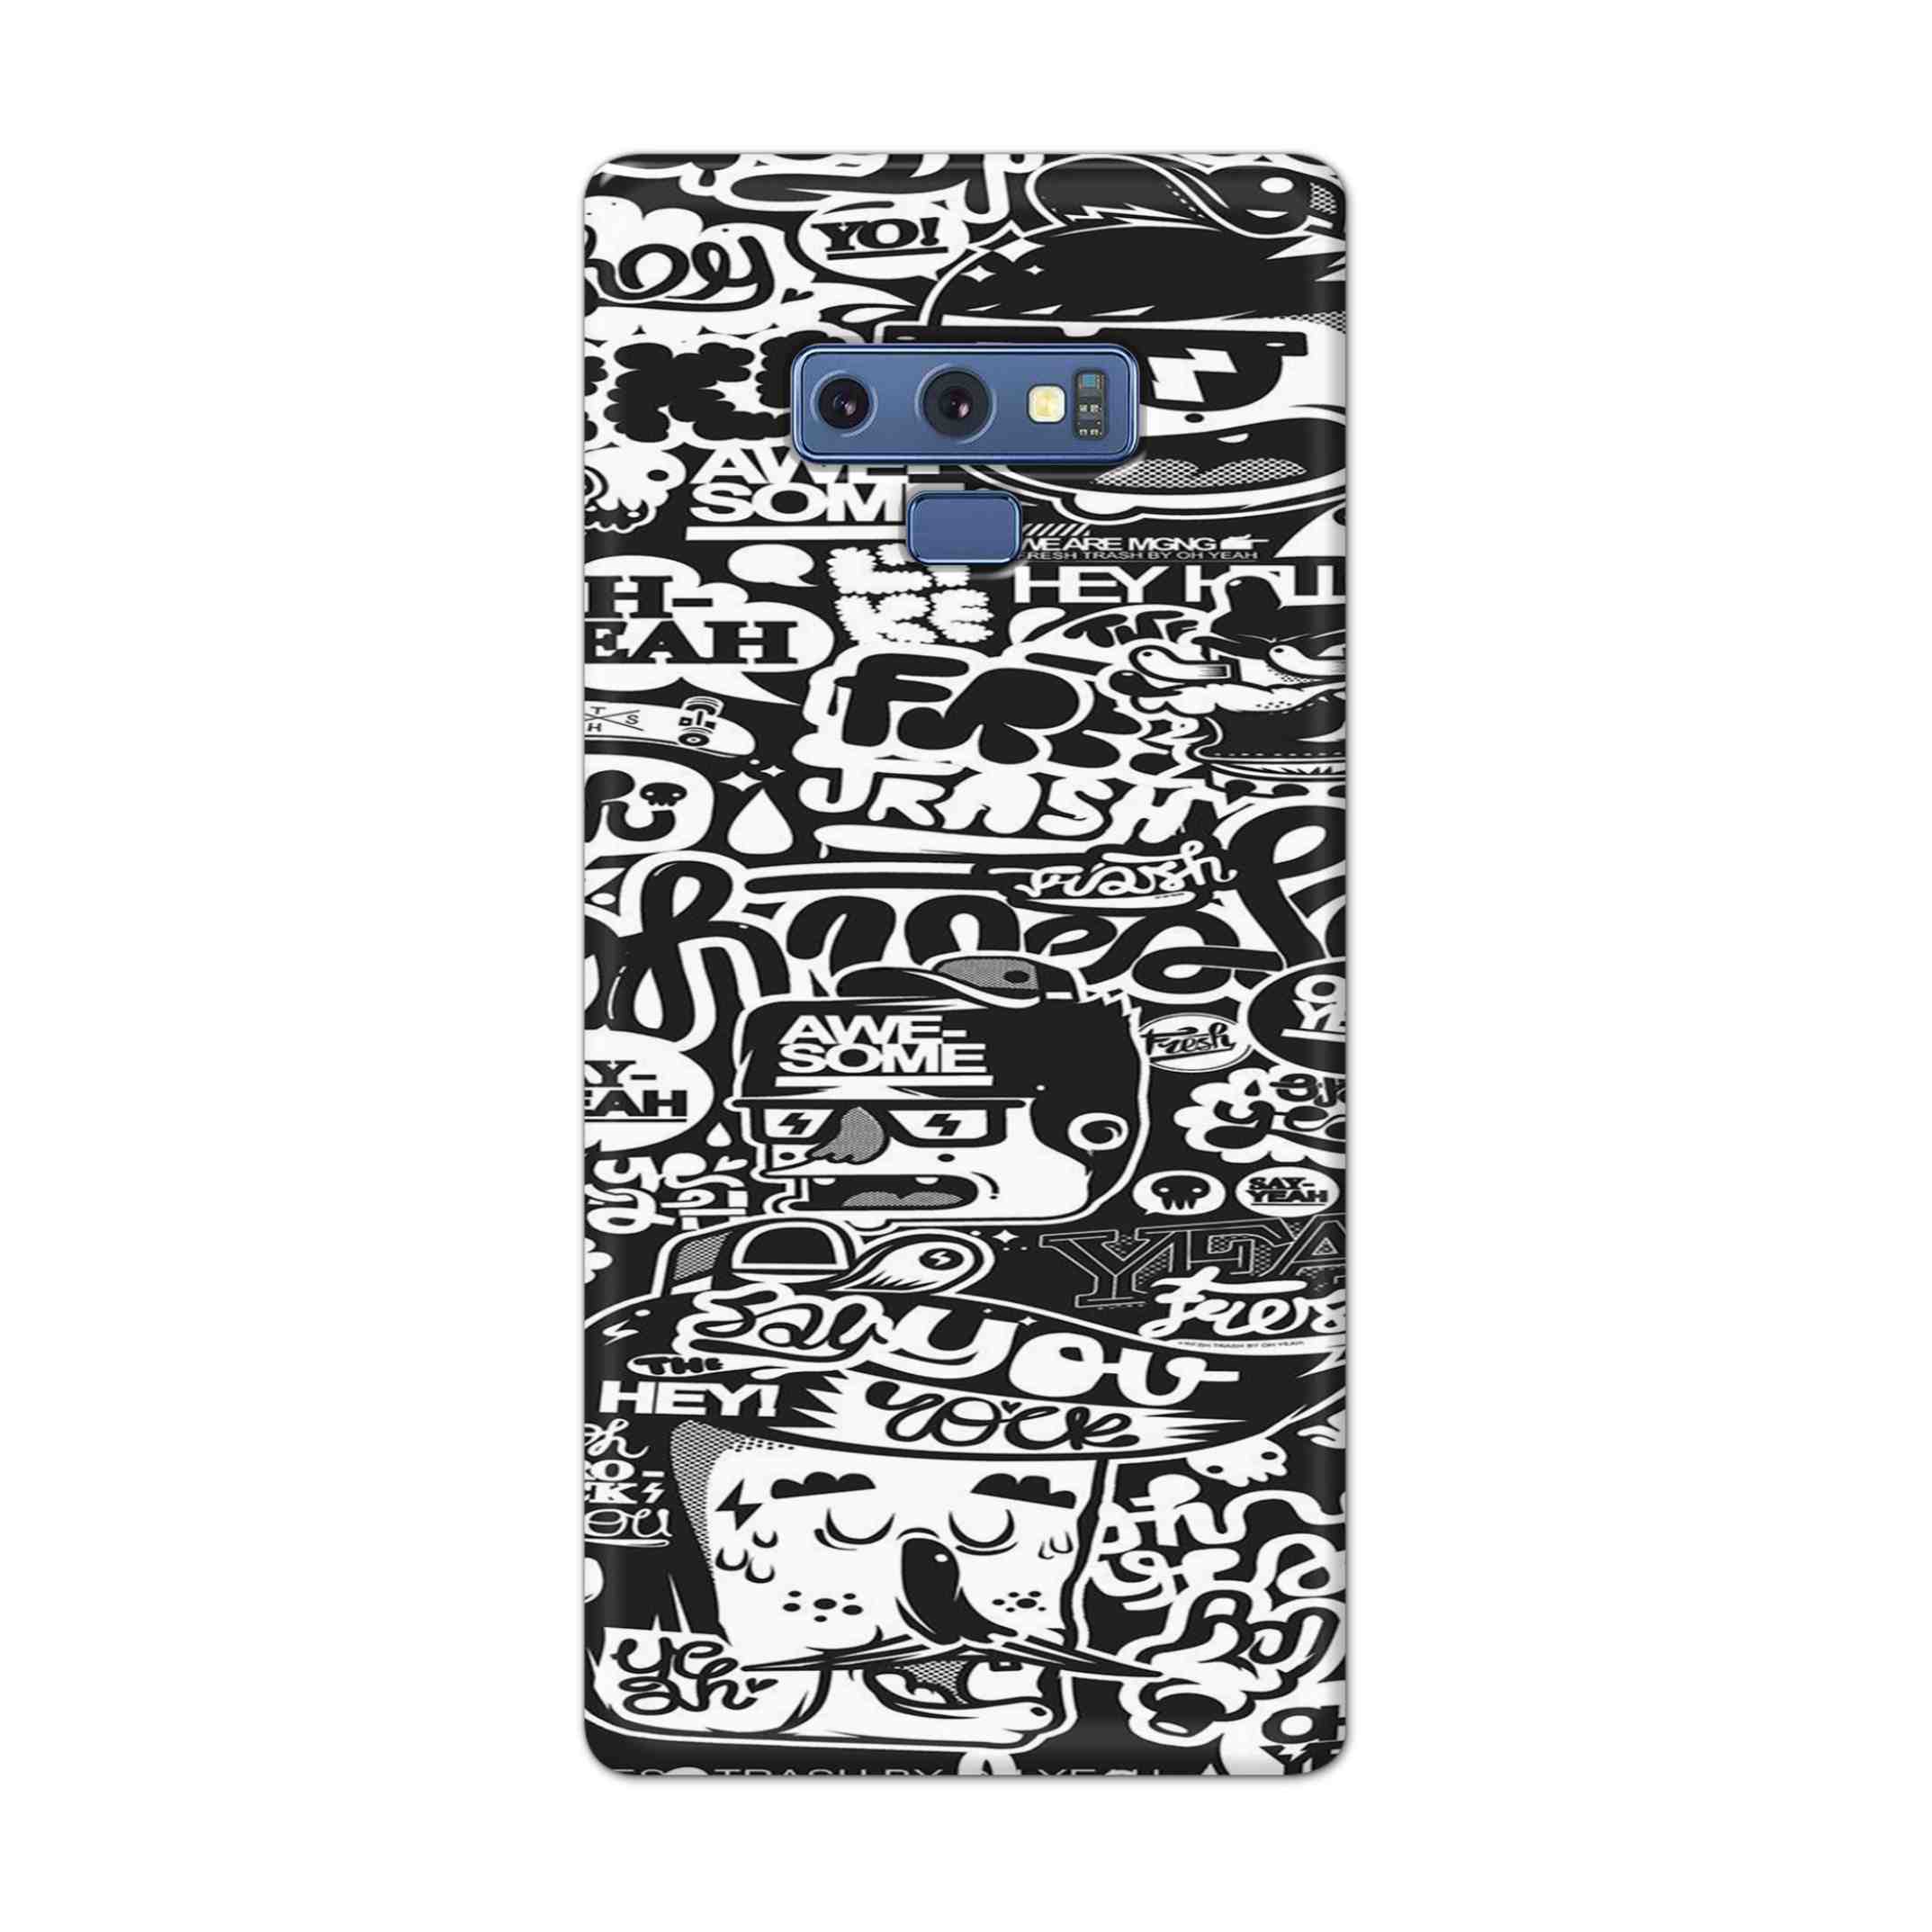 Buy Awesome Hard Back Mobile Phone Case Cover For Samsung Galaxy Note 9 Online